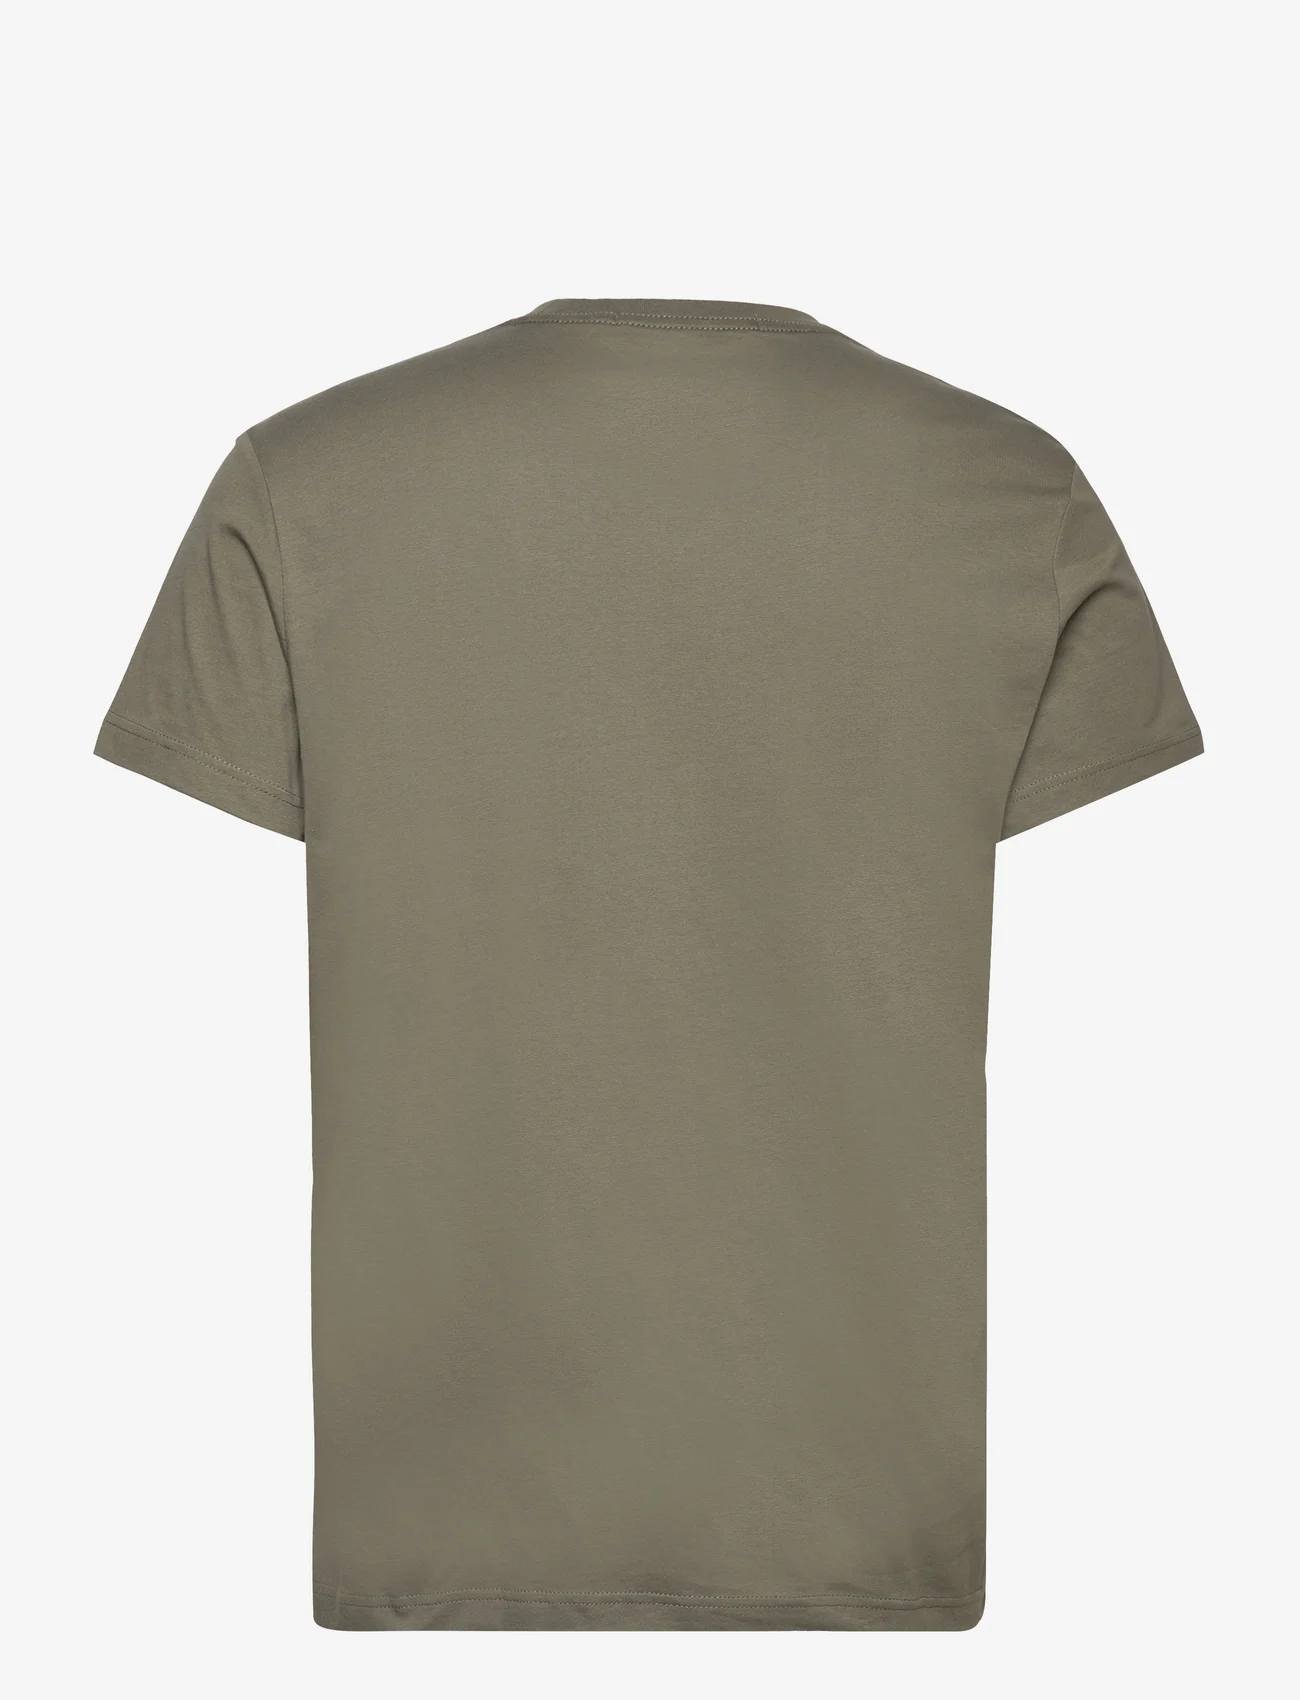 Calvin Klein Jeans - CK EMBRO BADGE TEE - basic t-shirts - dusty olive - 1